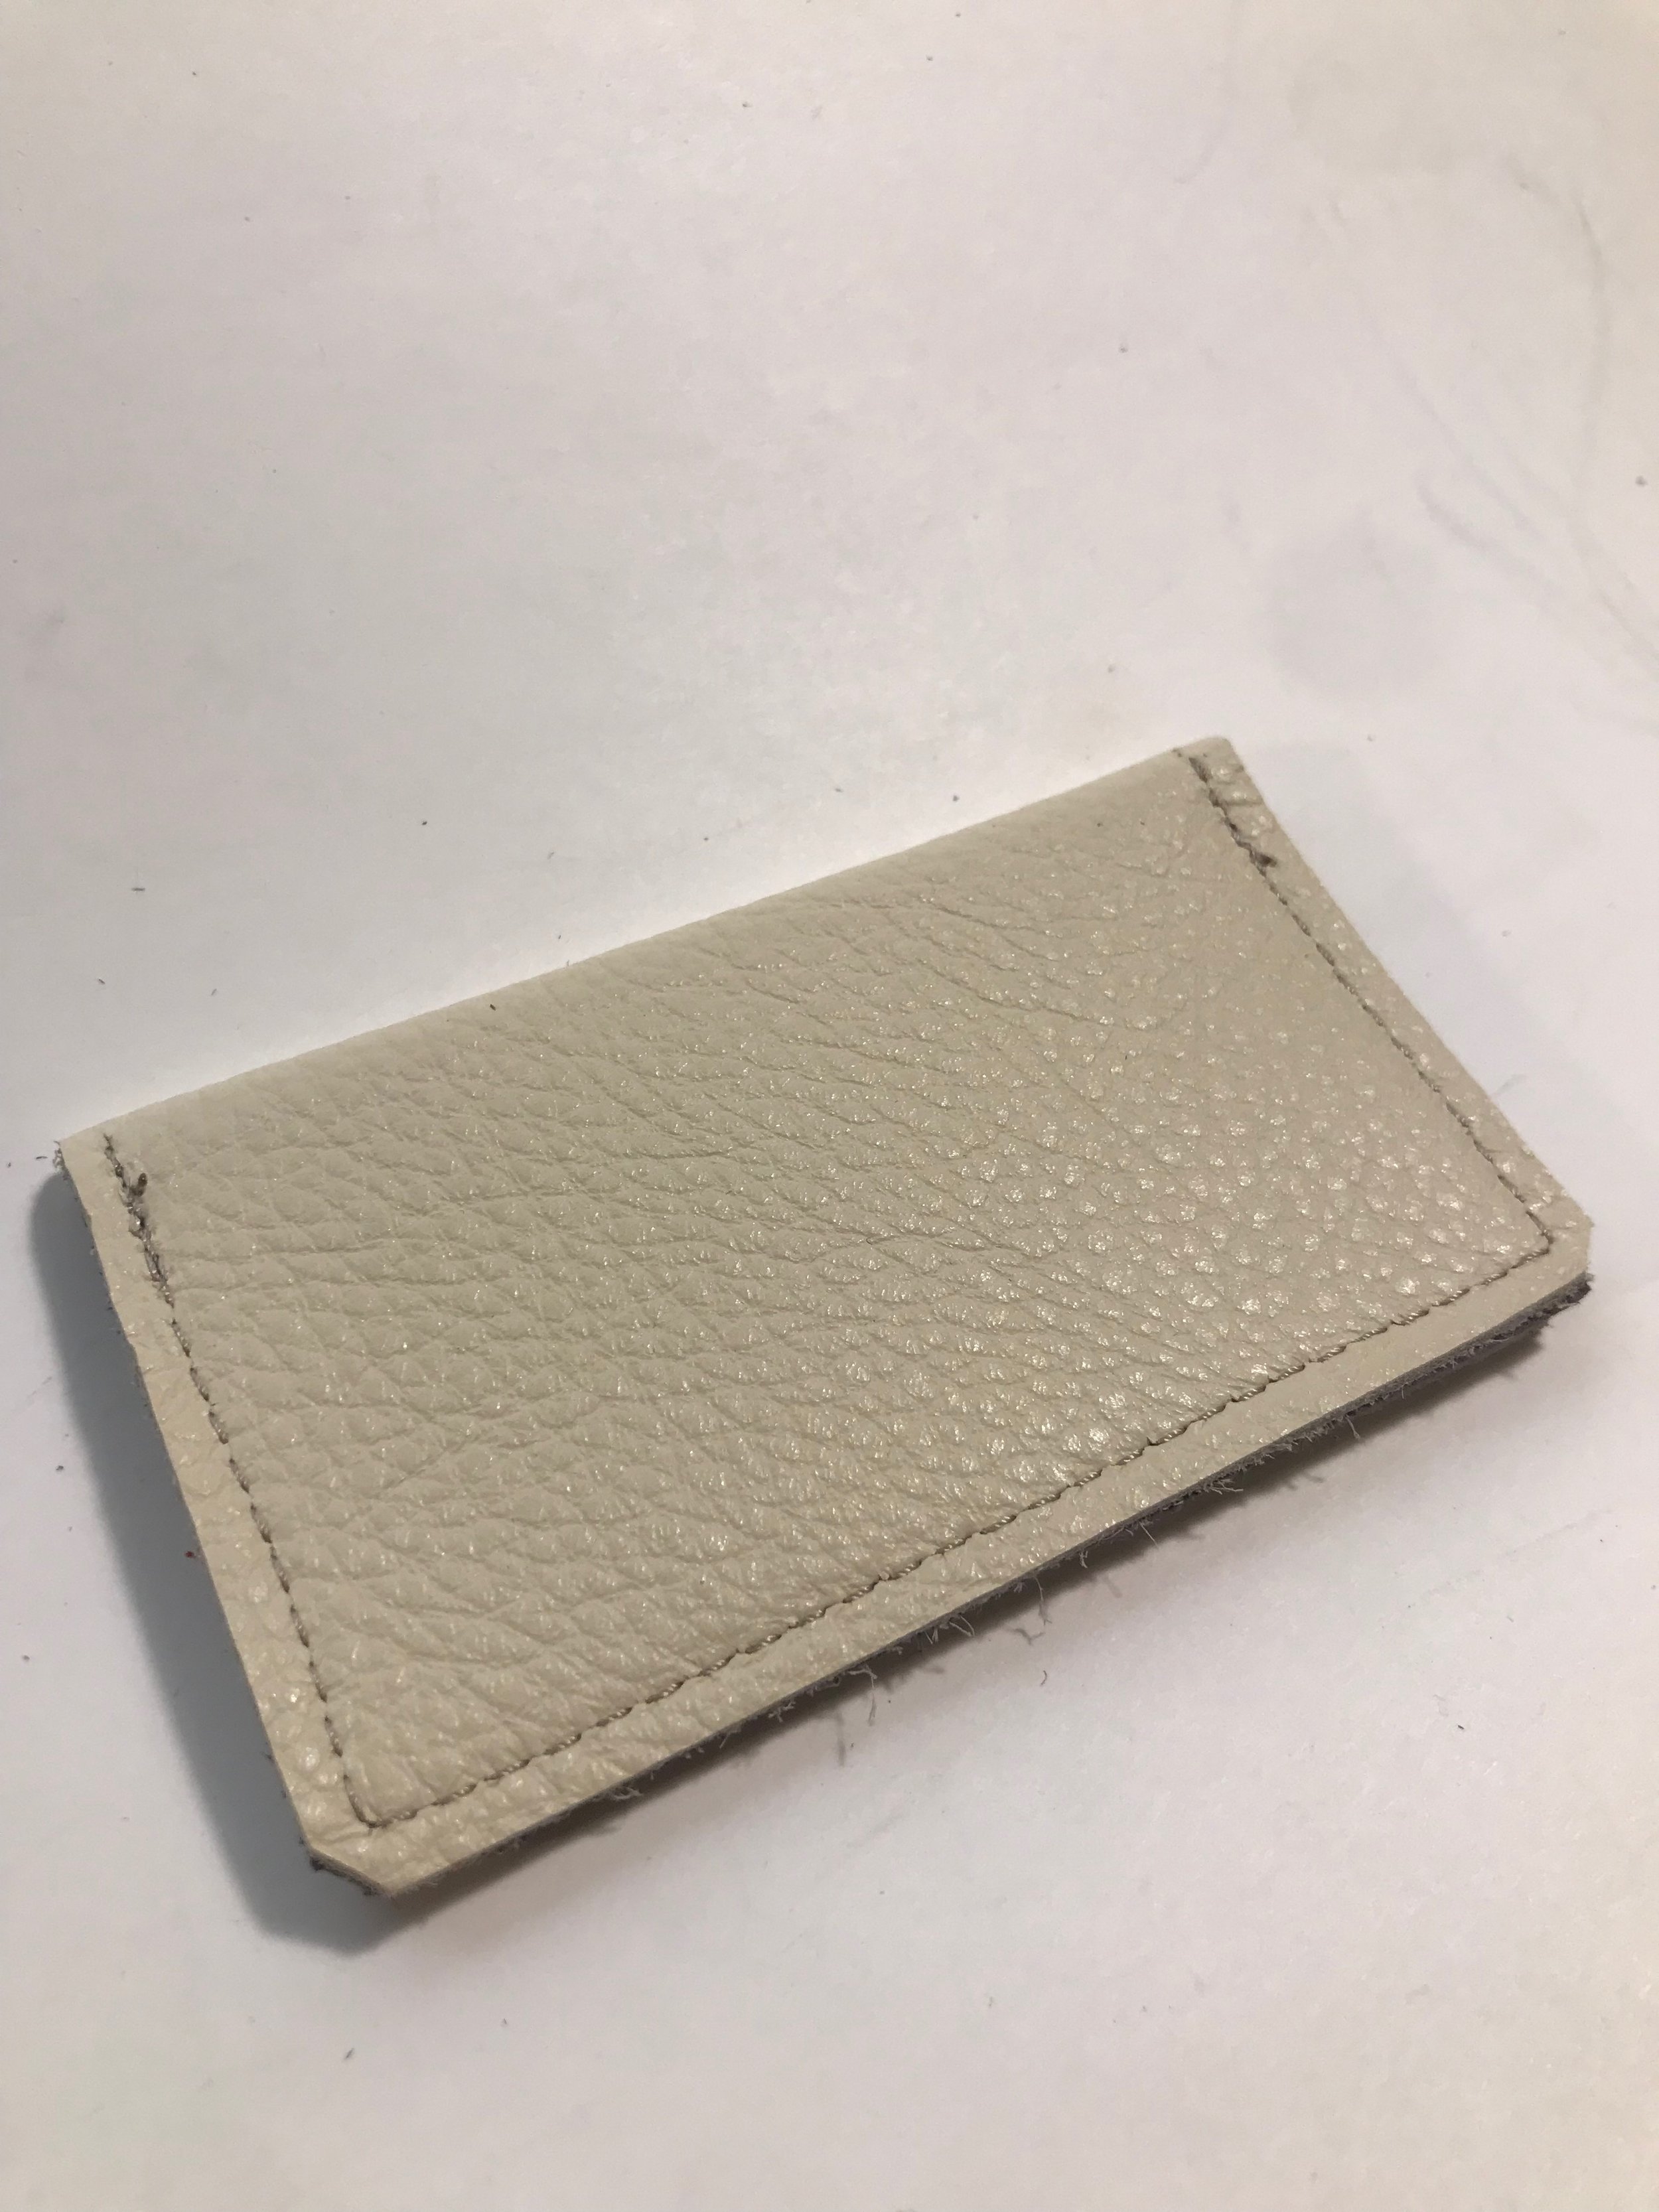 Simple card case in cream & purple off cut upholstery leather by Radjuli —  Radjuli Leather Designs